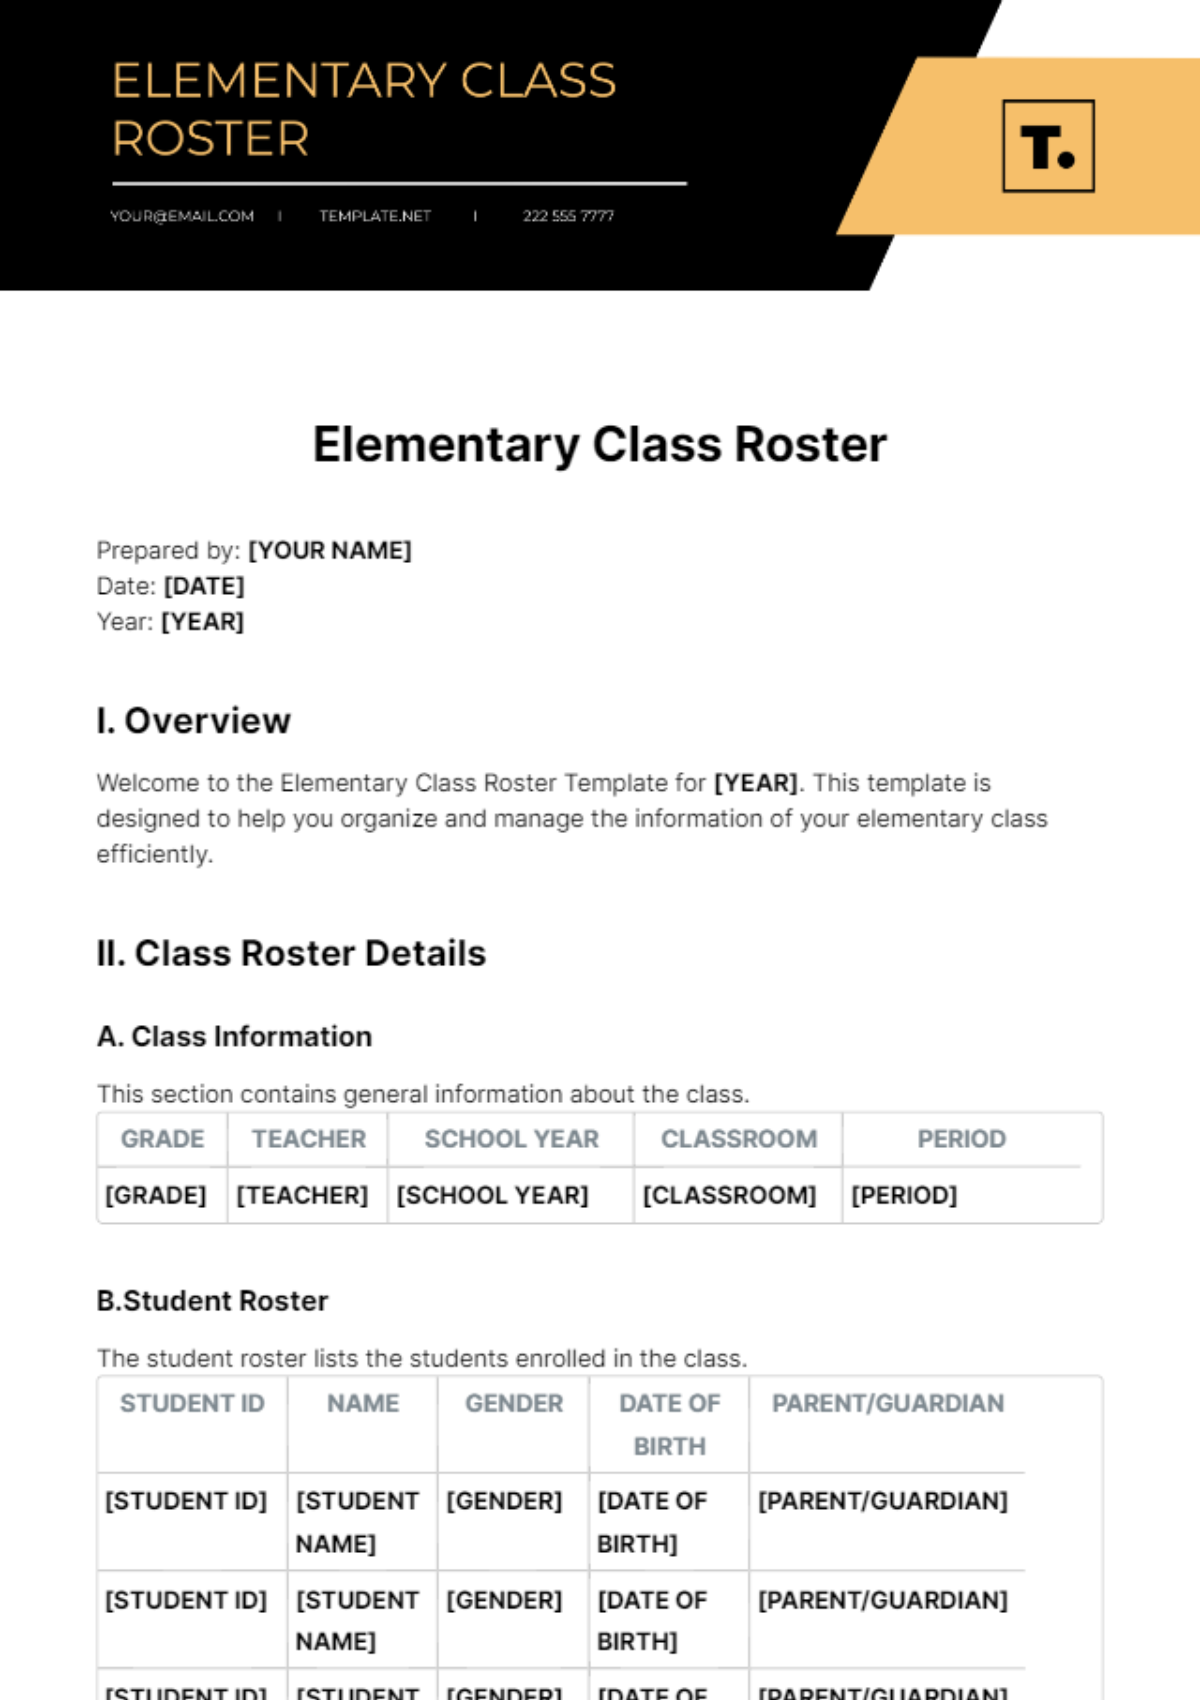 Elementary Class Roster Template